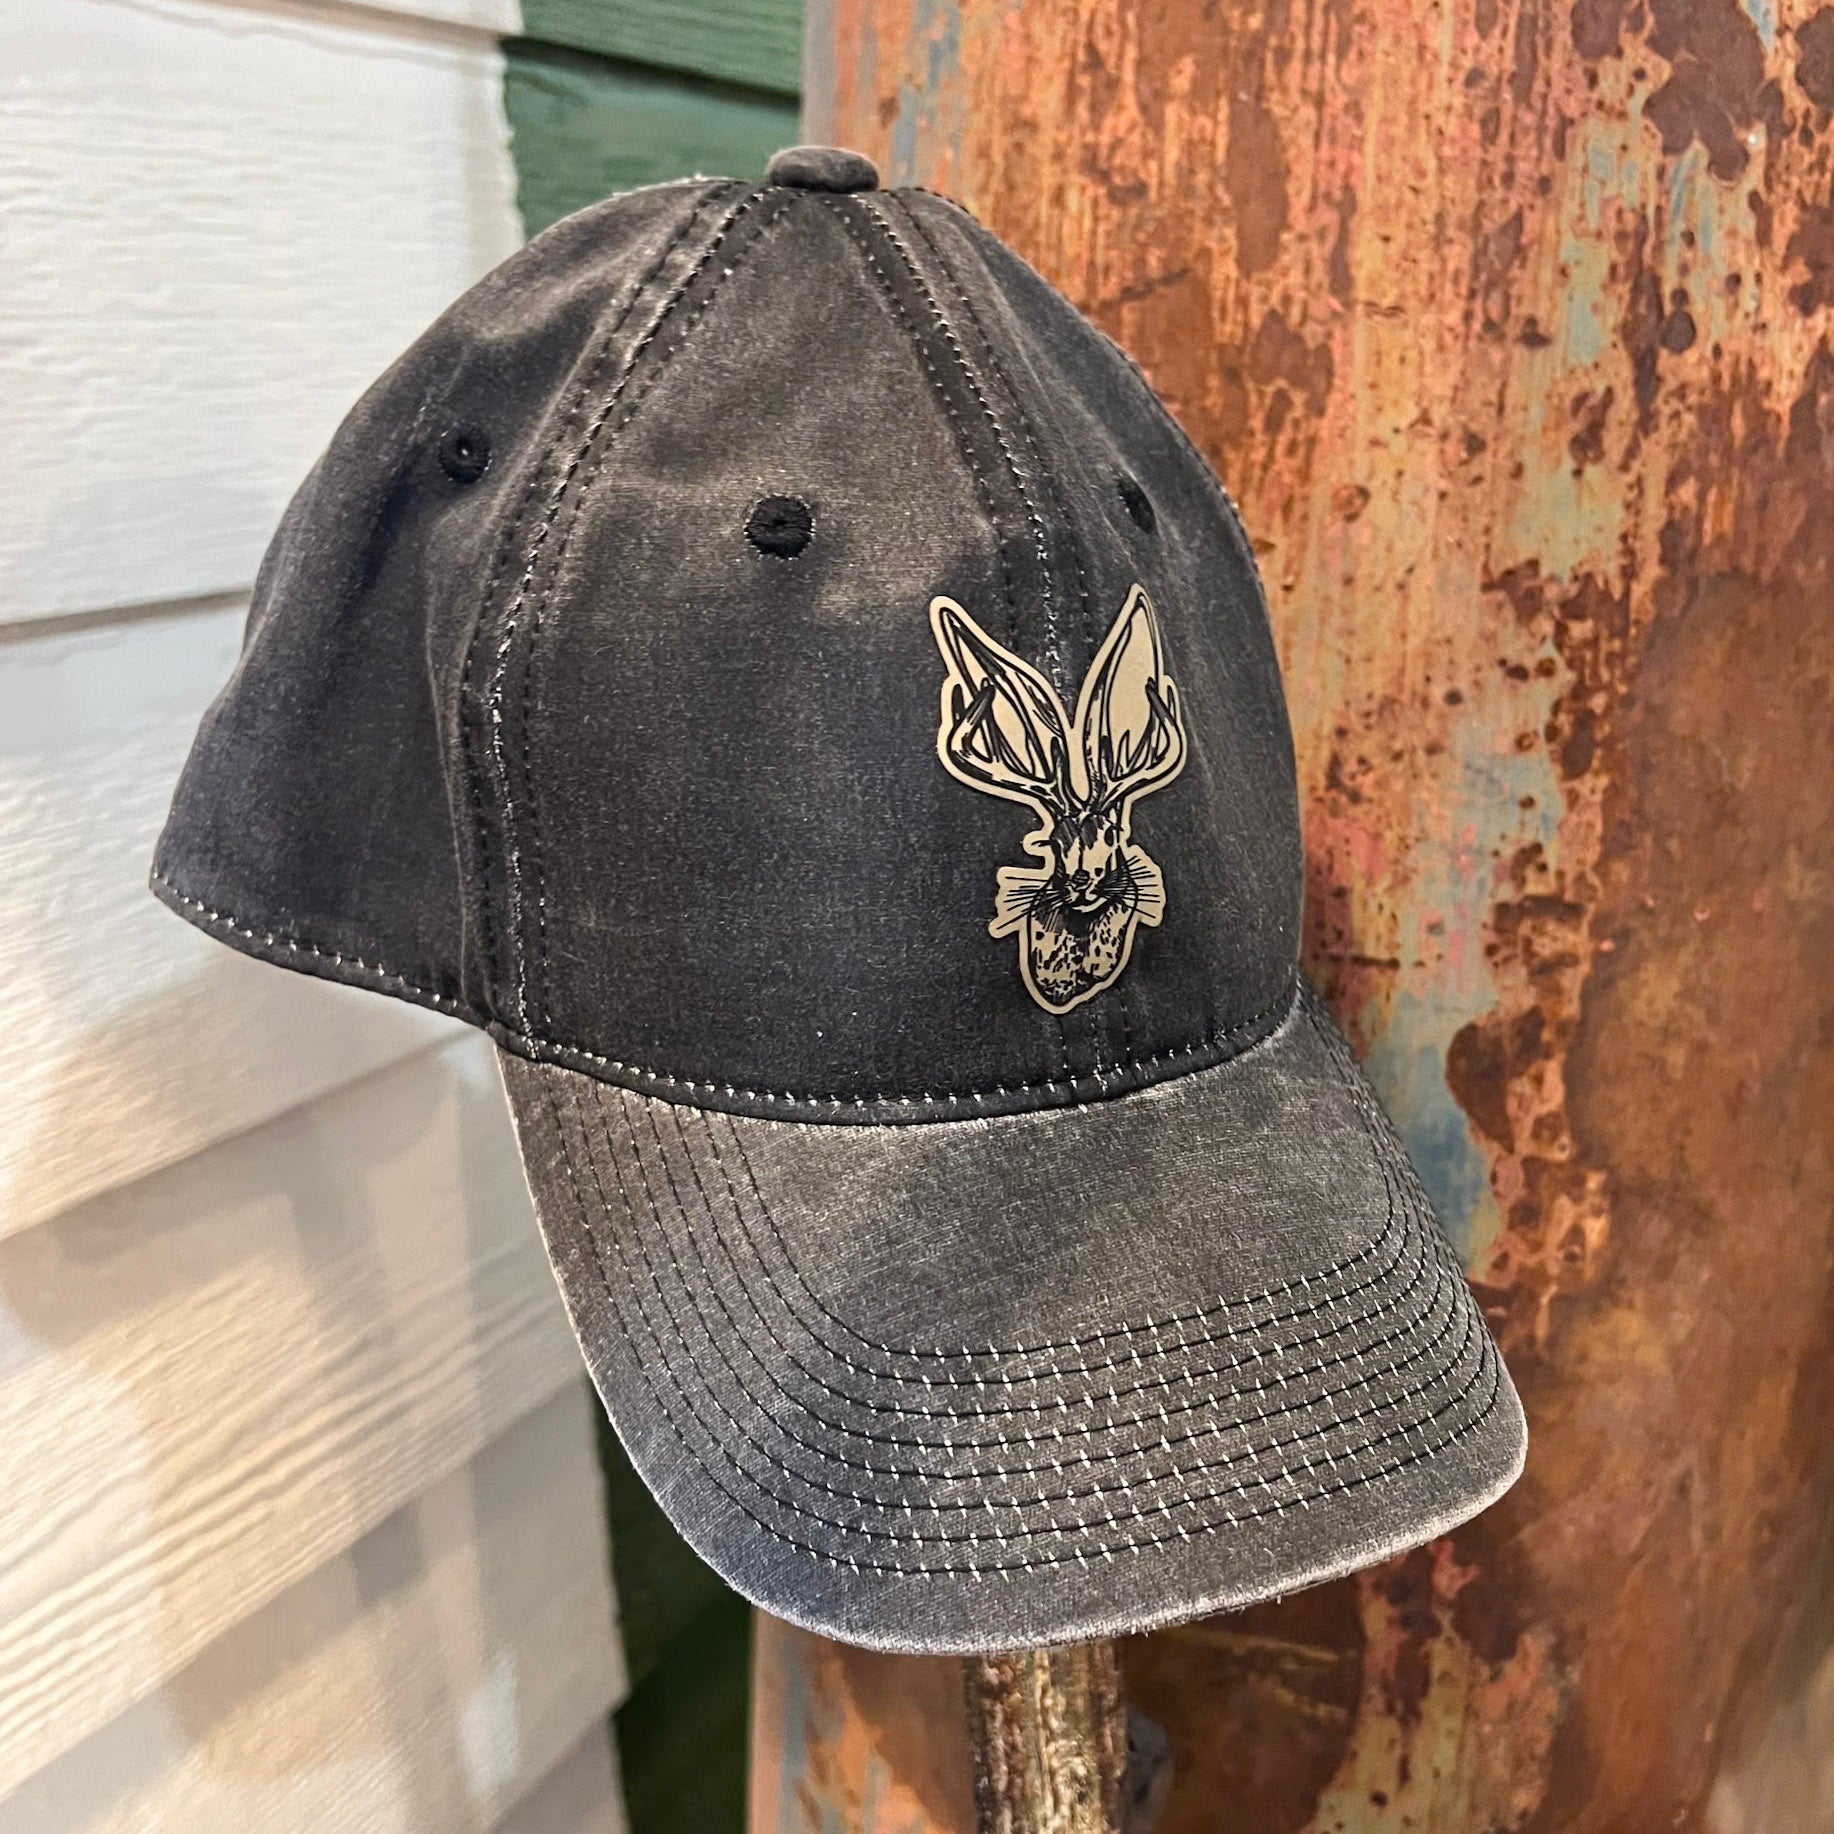 Jackalope artisan hat. Wyoming hat. Roam Around Wear is a Wyoming t-shirt company based out of Gillette, Wyoming